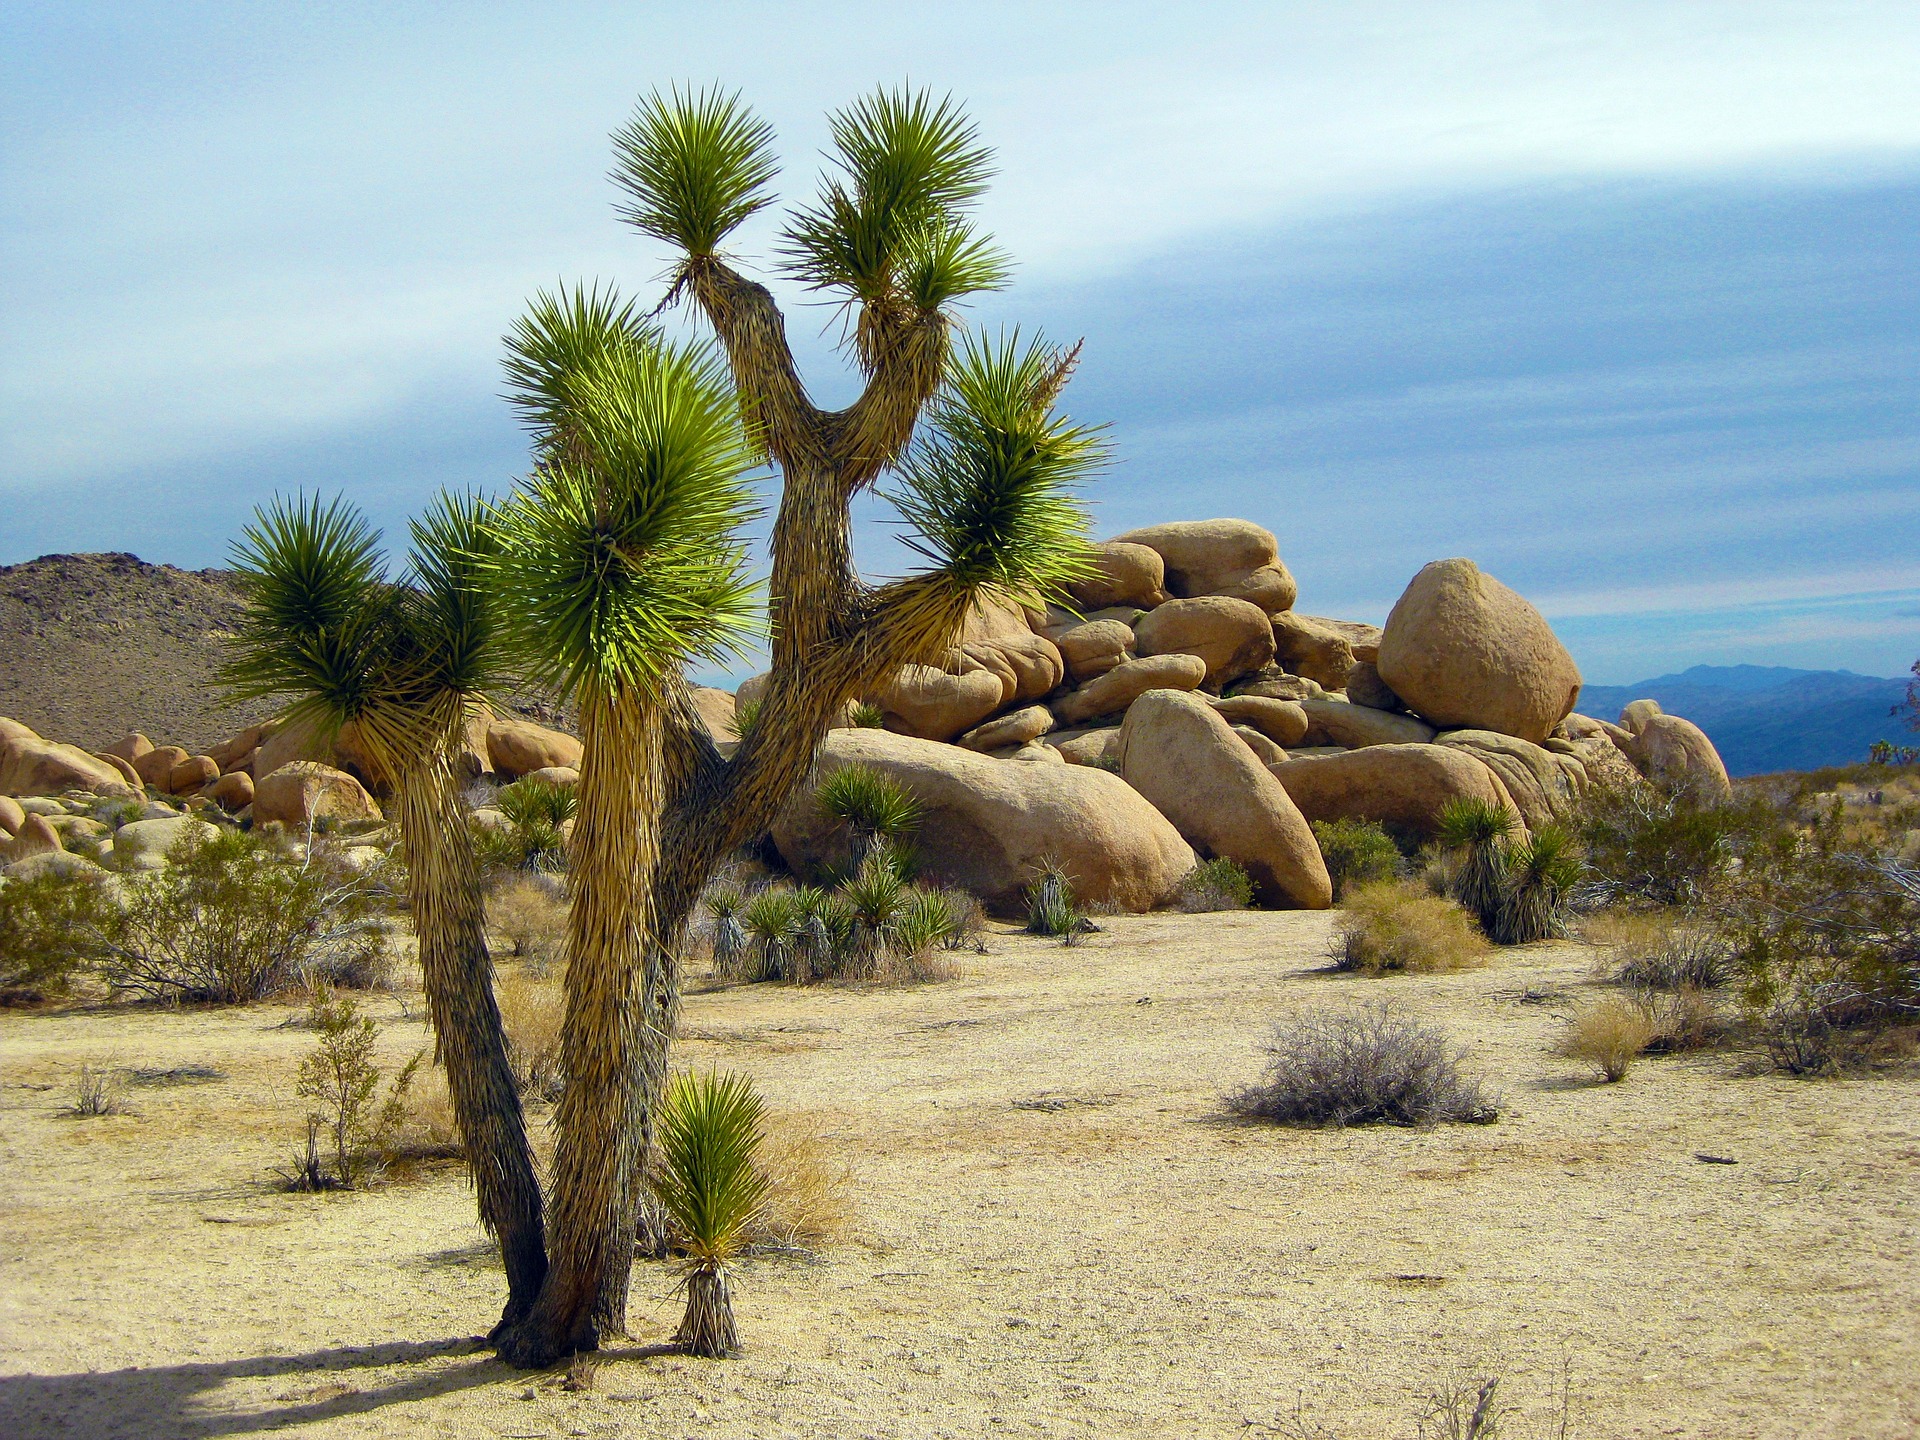 Enjoy hiking and more this Palm Springs winter